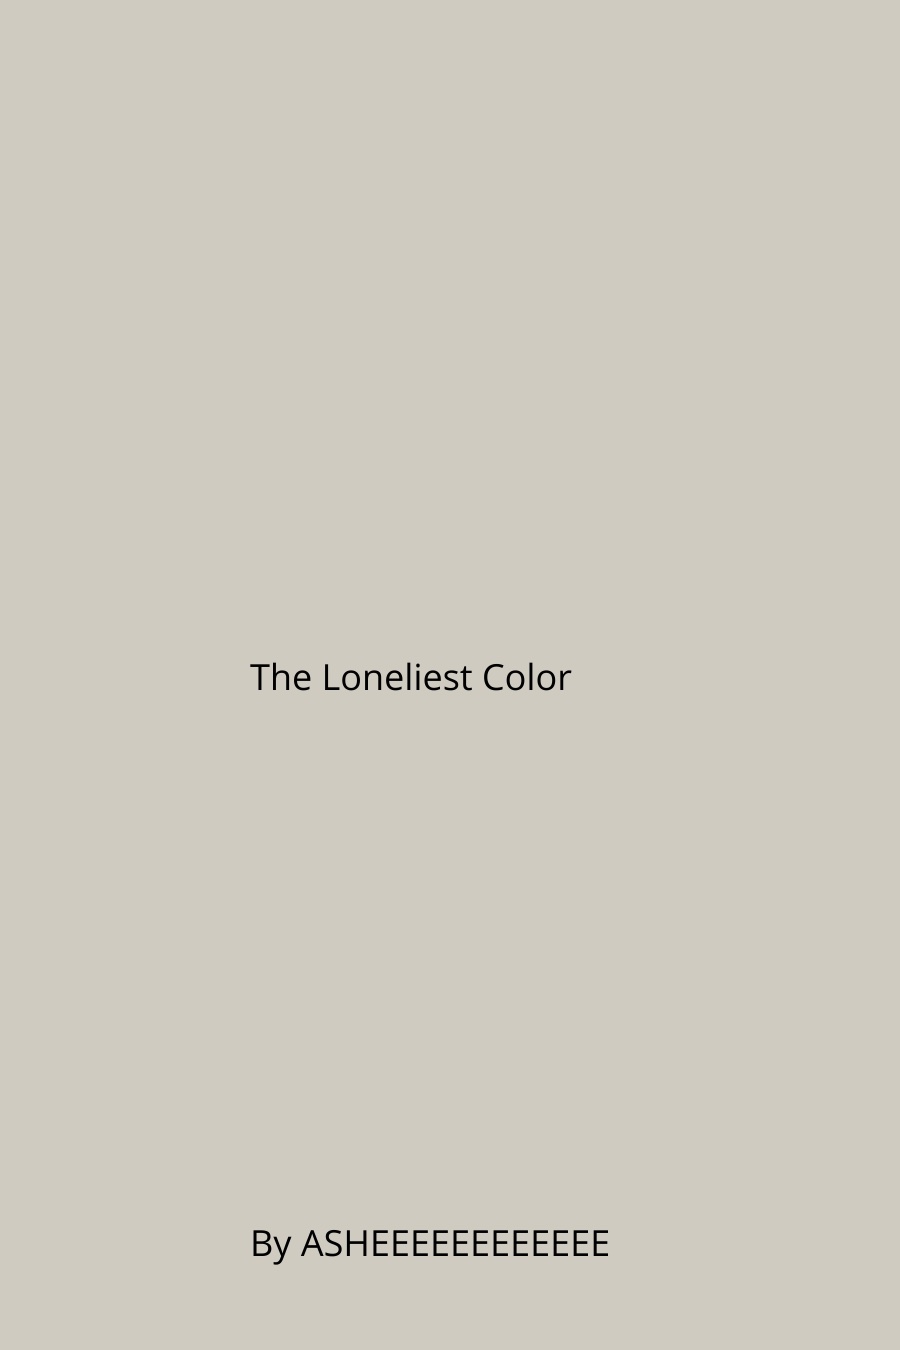 The Loneliest Color by Ash H